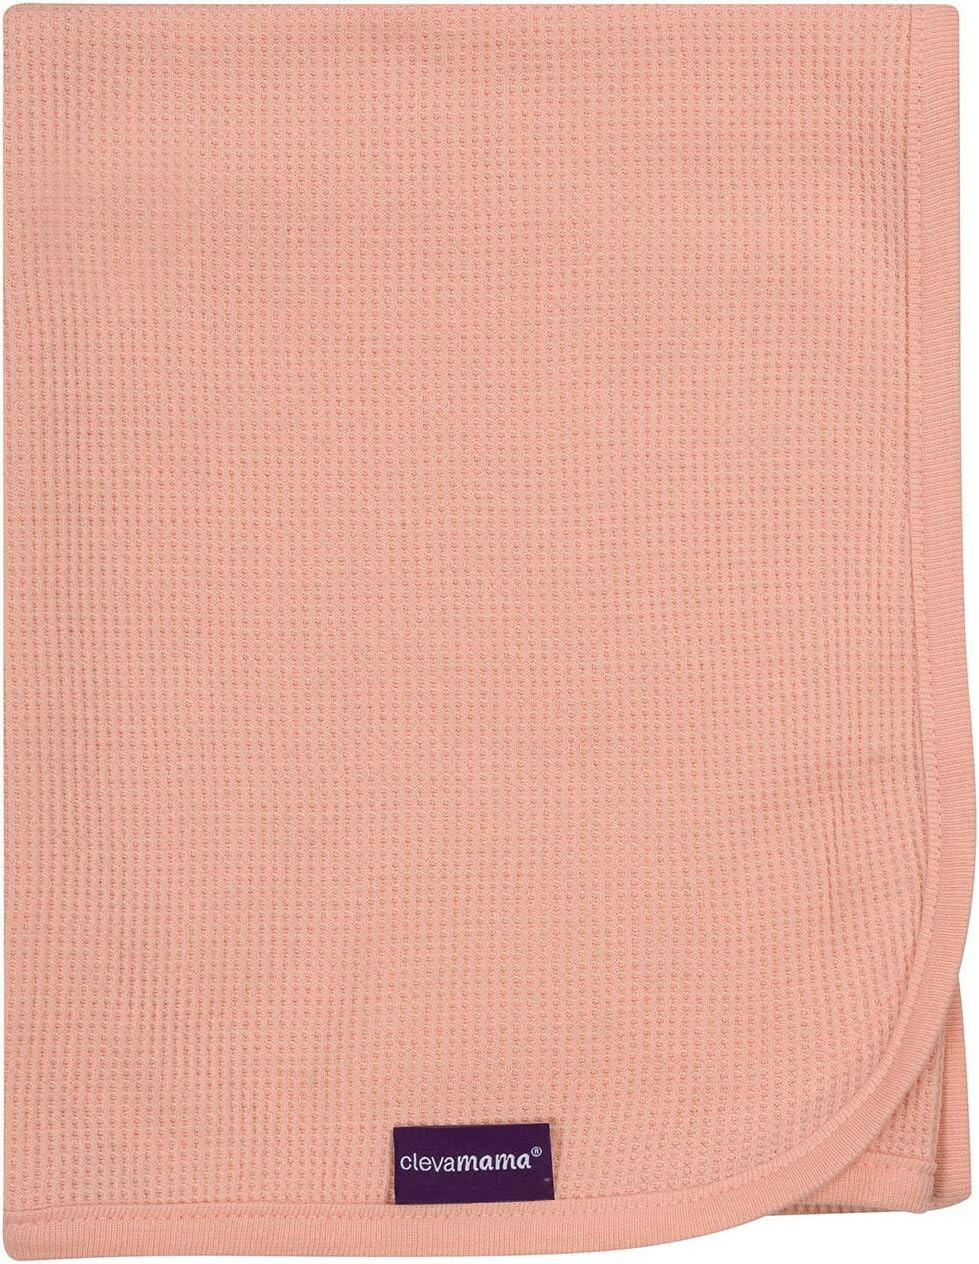 Clevamama Baby Waffle Weave Cotton Blanket - for Nursery Bedding, Moses Basket, Pushchair - 70x90 cm.